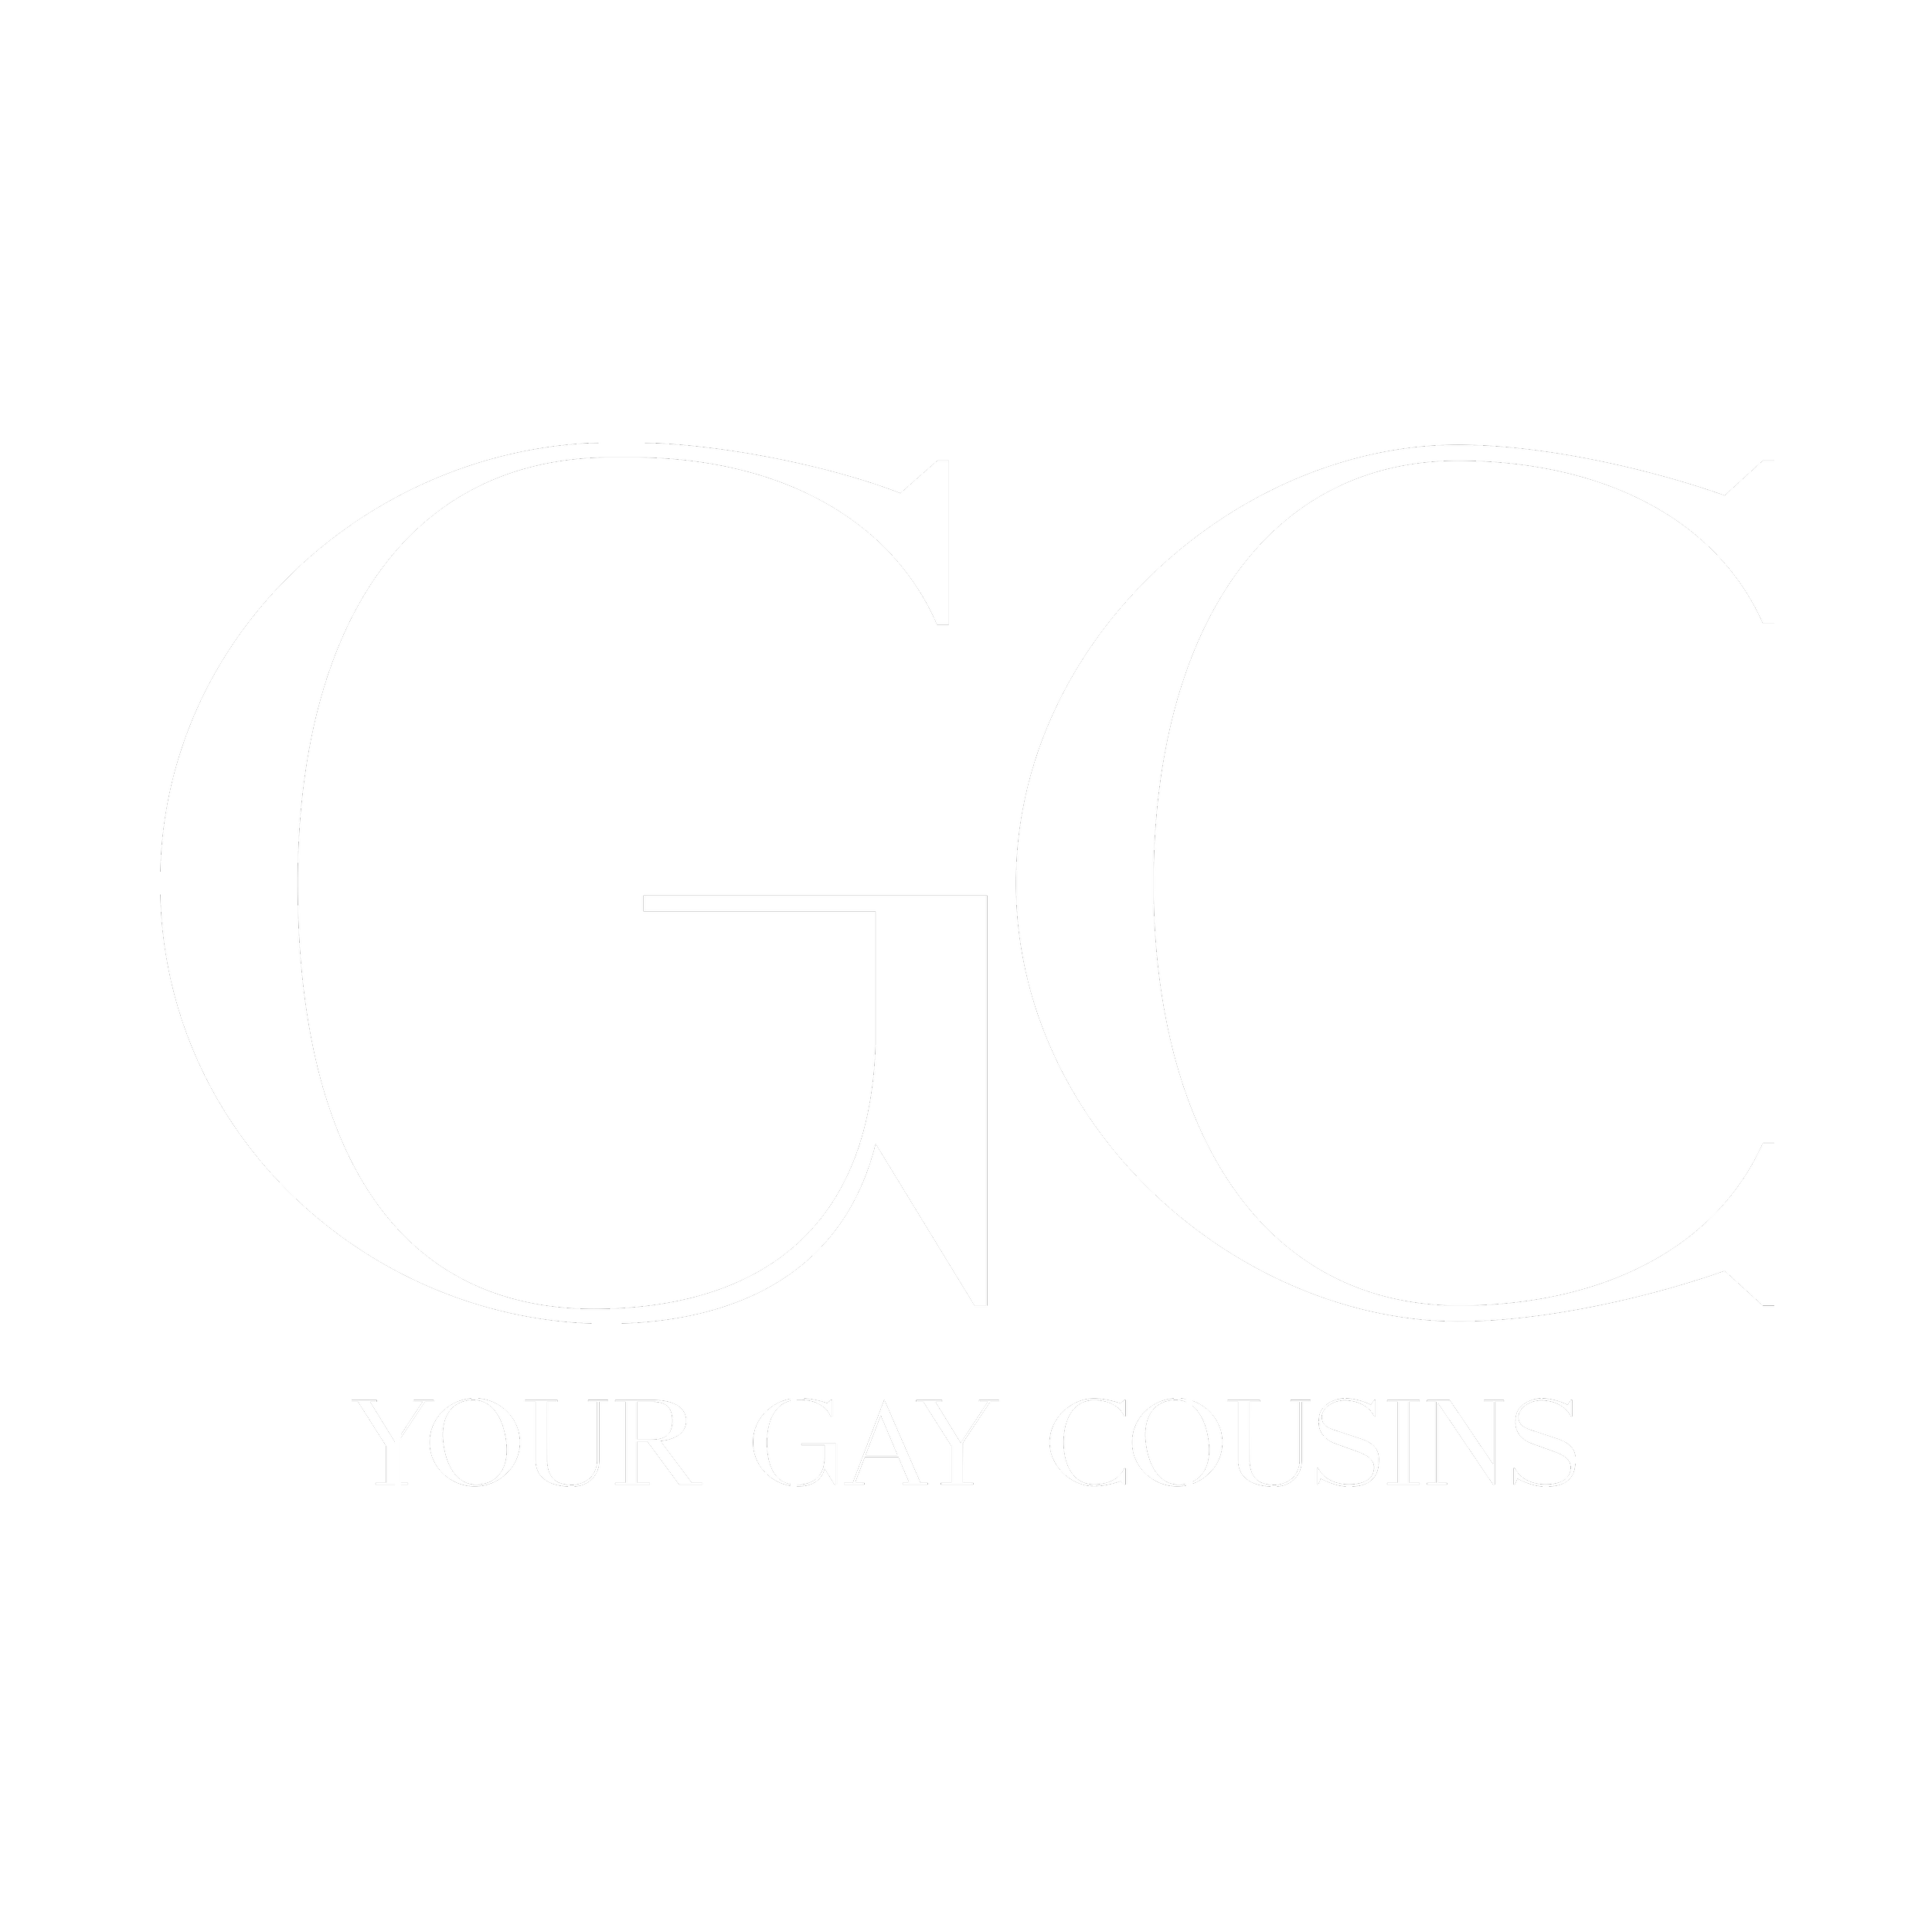 Your Gay Cousins